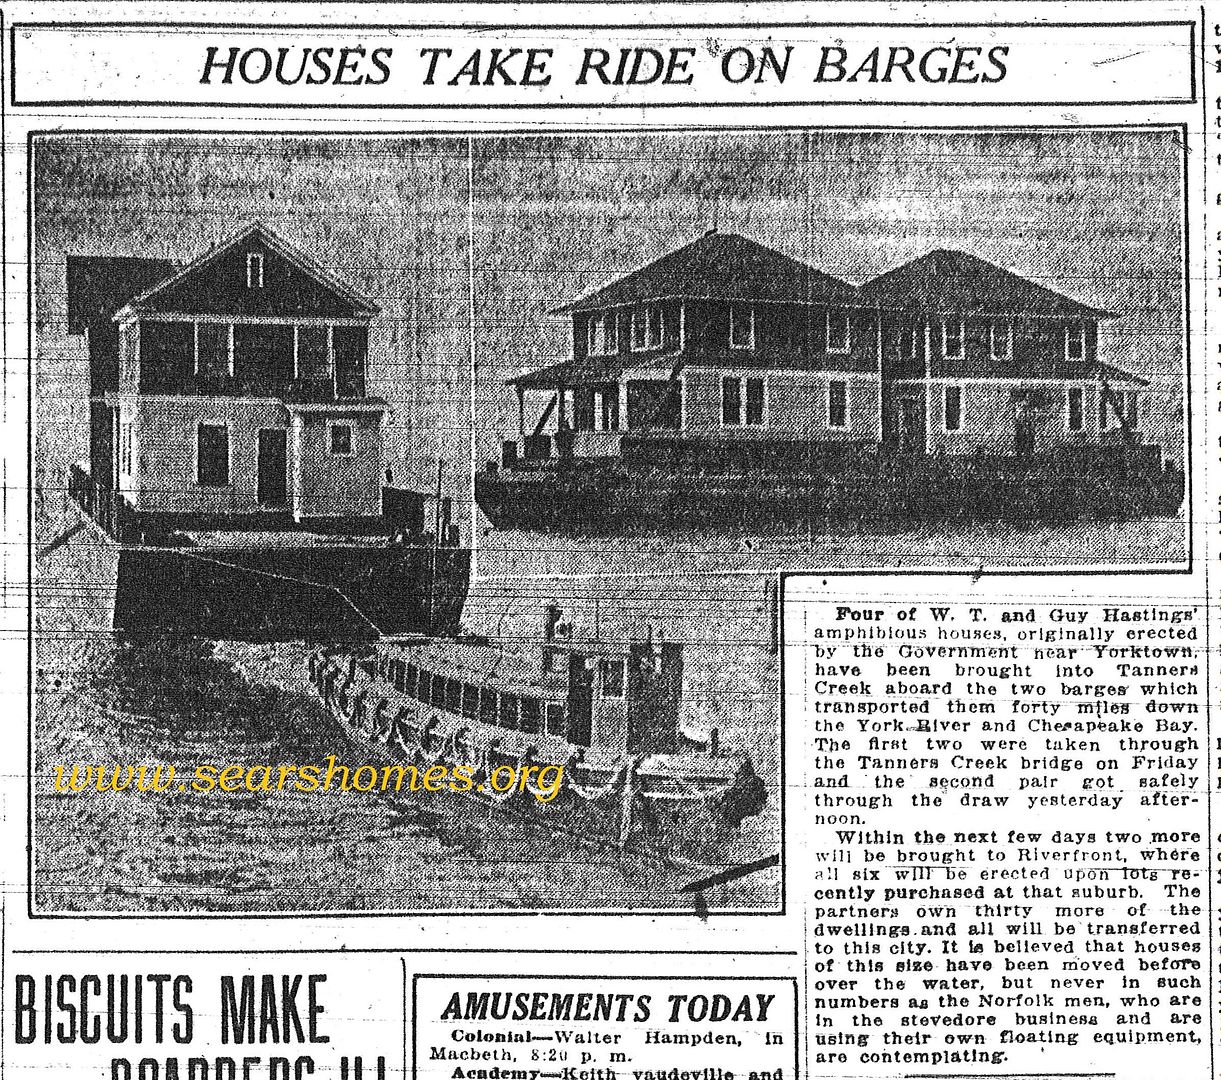 Here are some of Mr. Hastings homes floating down the Chesapeake Bay. This is from the Virginian Pilot (December 5, 1921). 